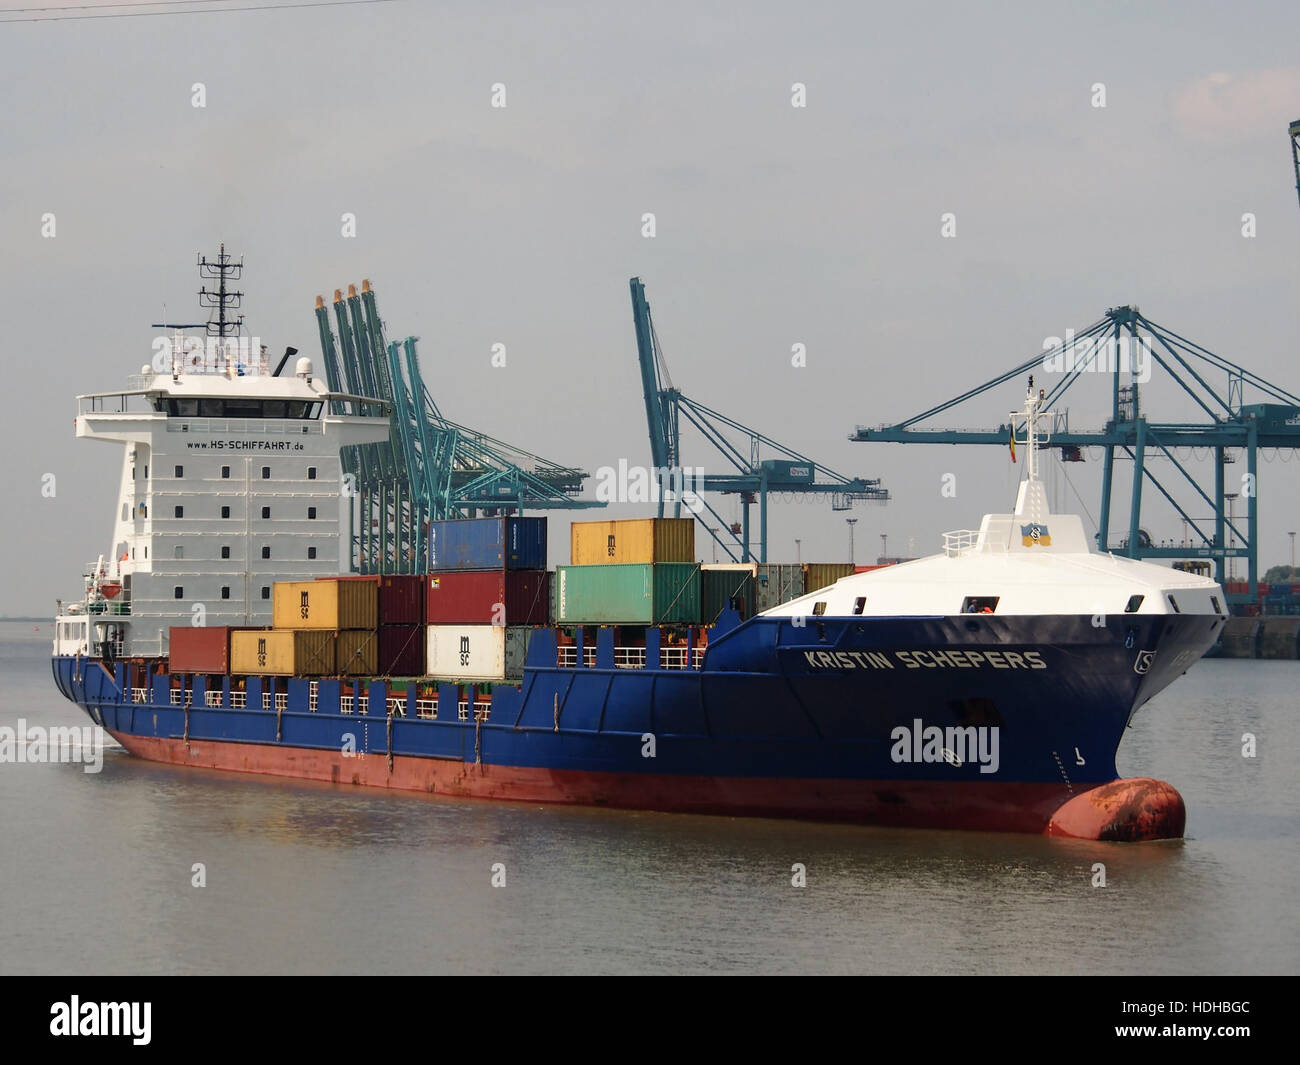 Kristin Schepers (ship, 2007) at Port of Antwerp pic2 Stock Photo